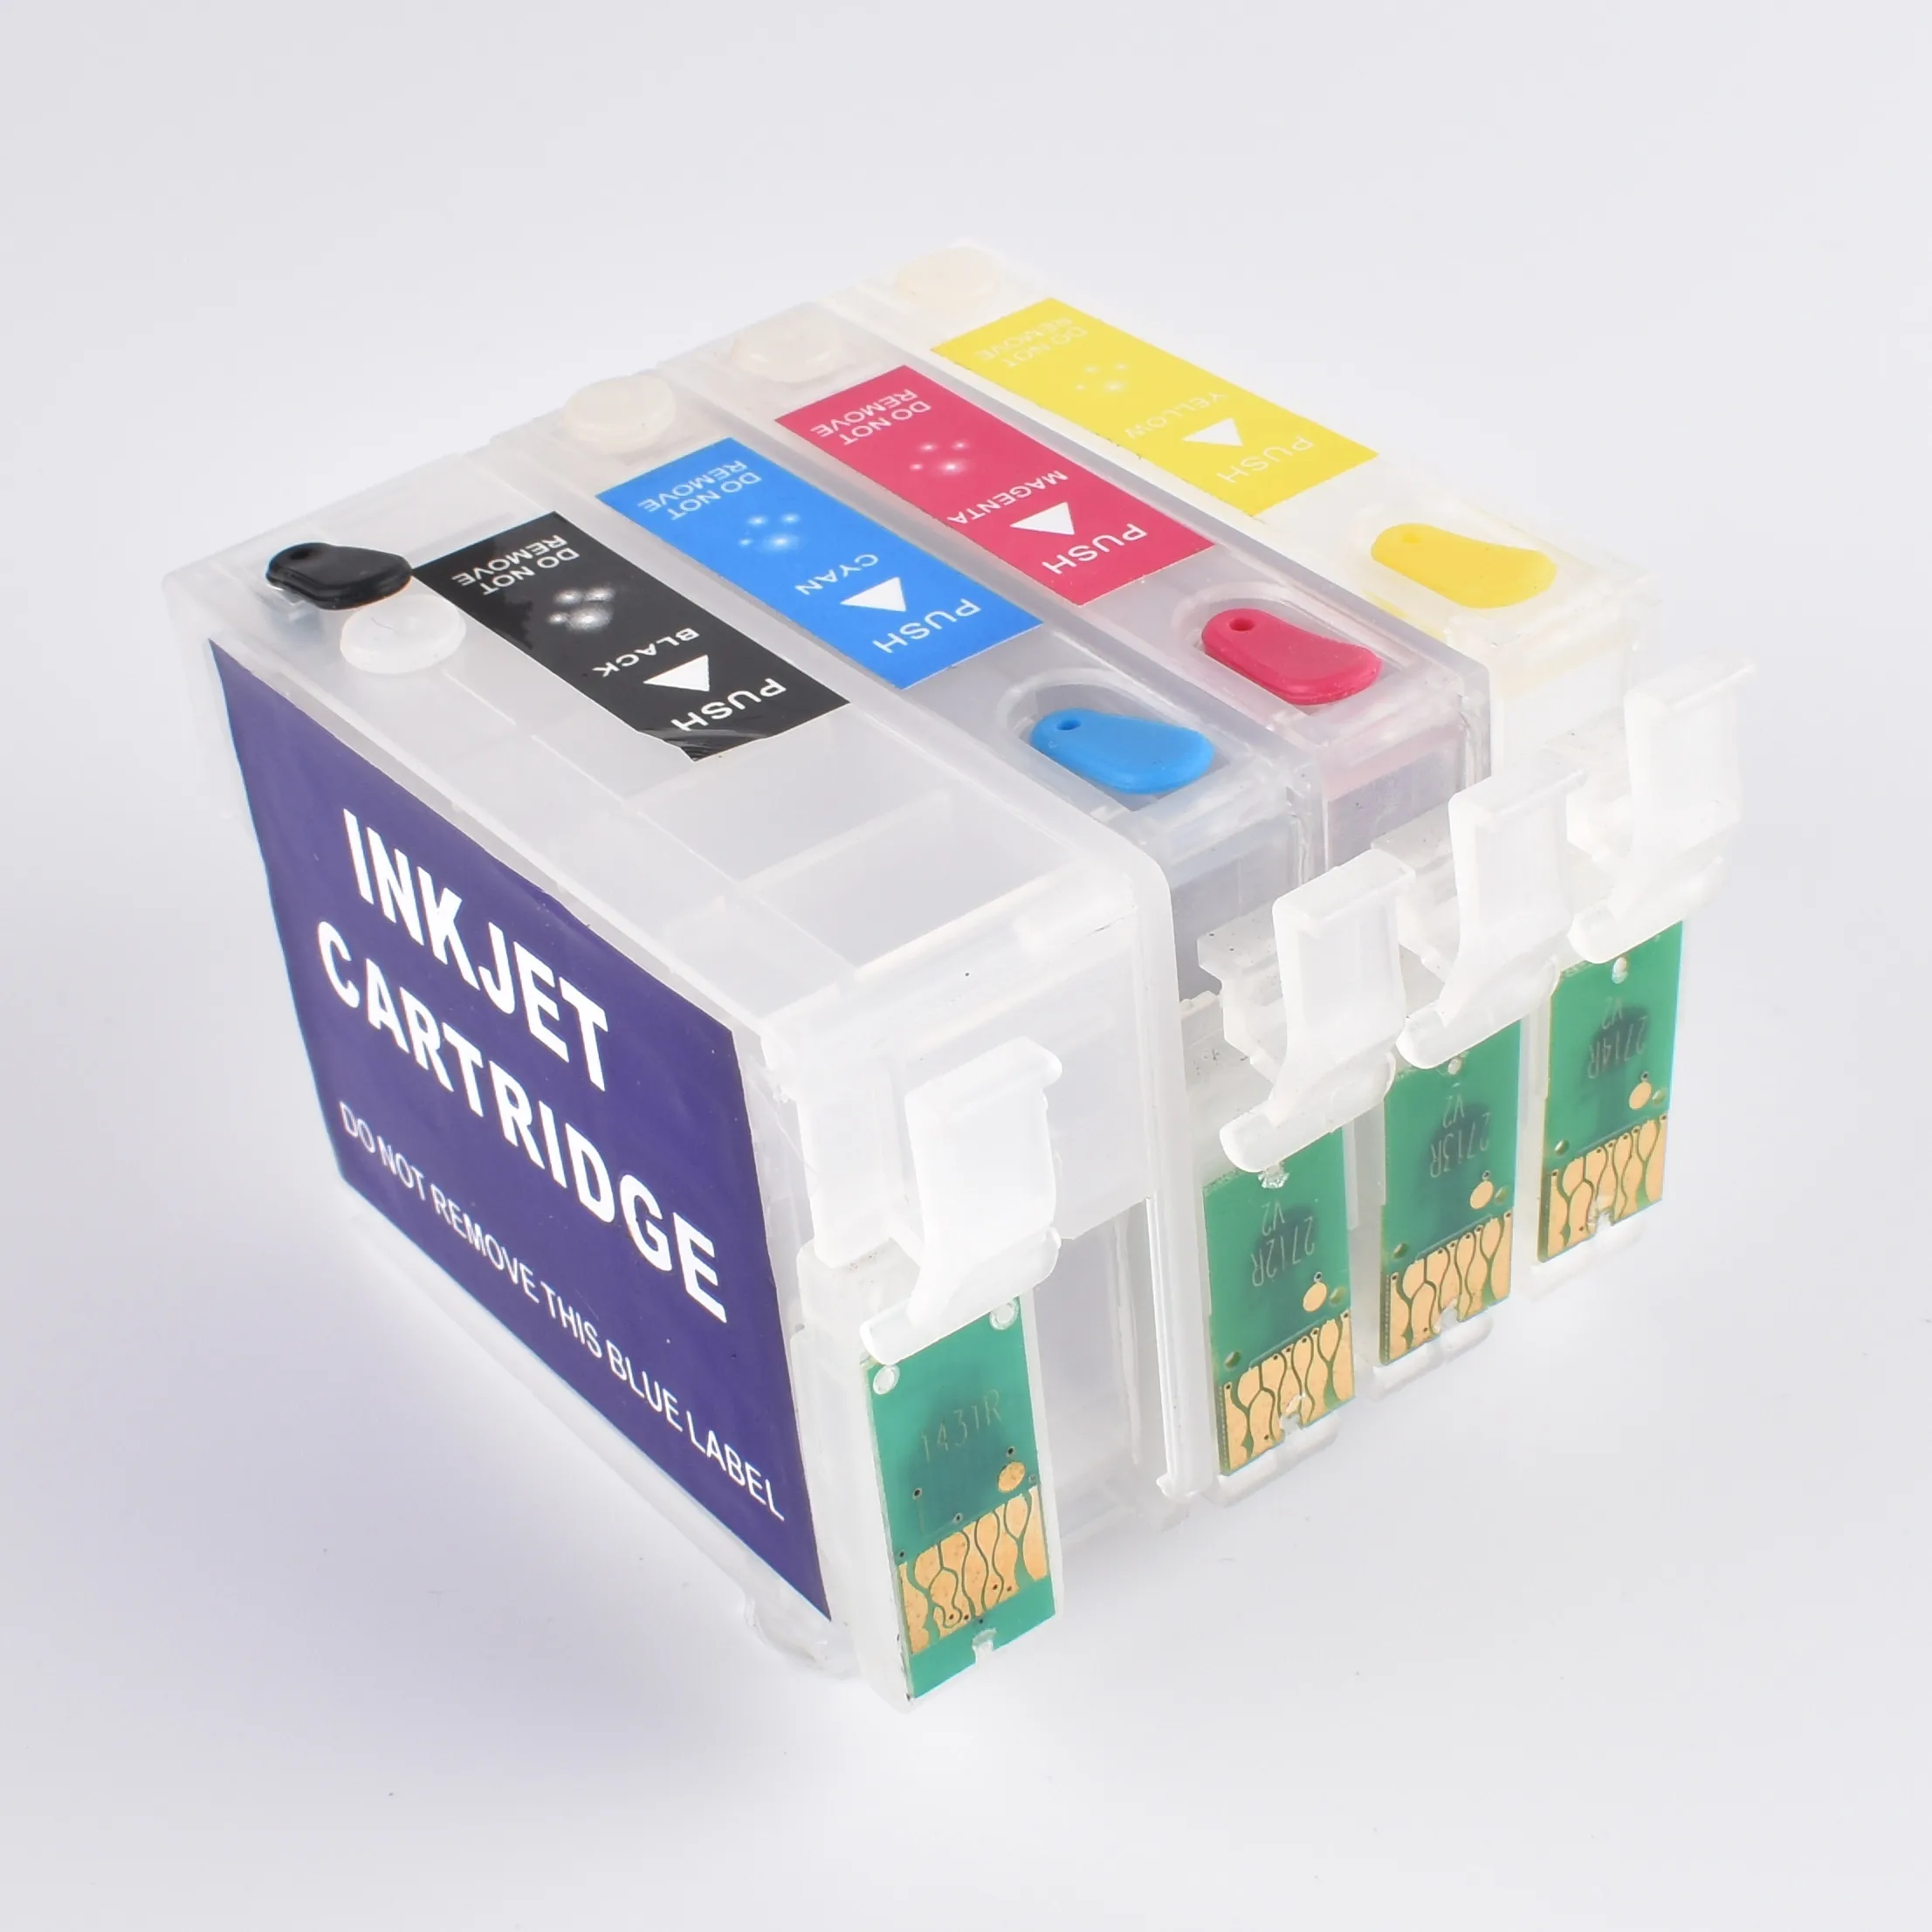 

252XL T2521 refillable ink cartridge for EPSON WorkForce WF-7110/WF-7620/WF-7610/WF-3620/WF-3640/WF-7210/WF-7710/WF-7720 printer